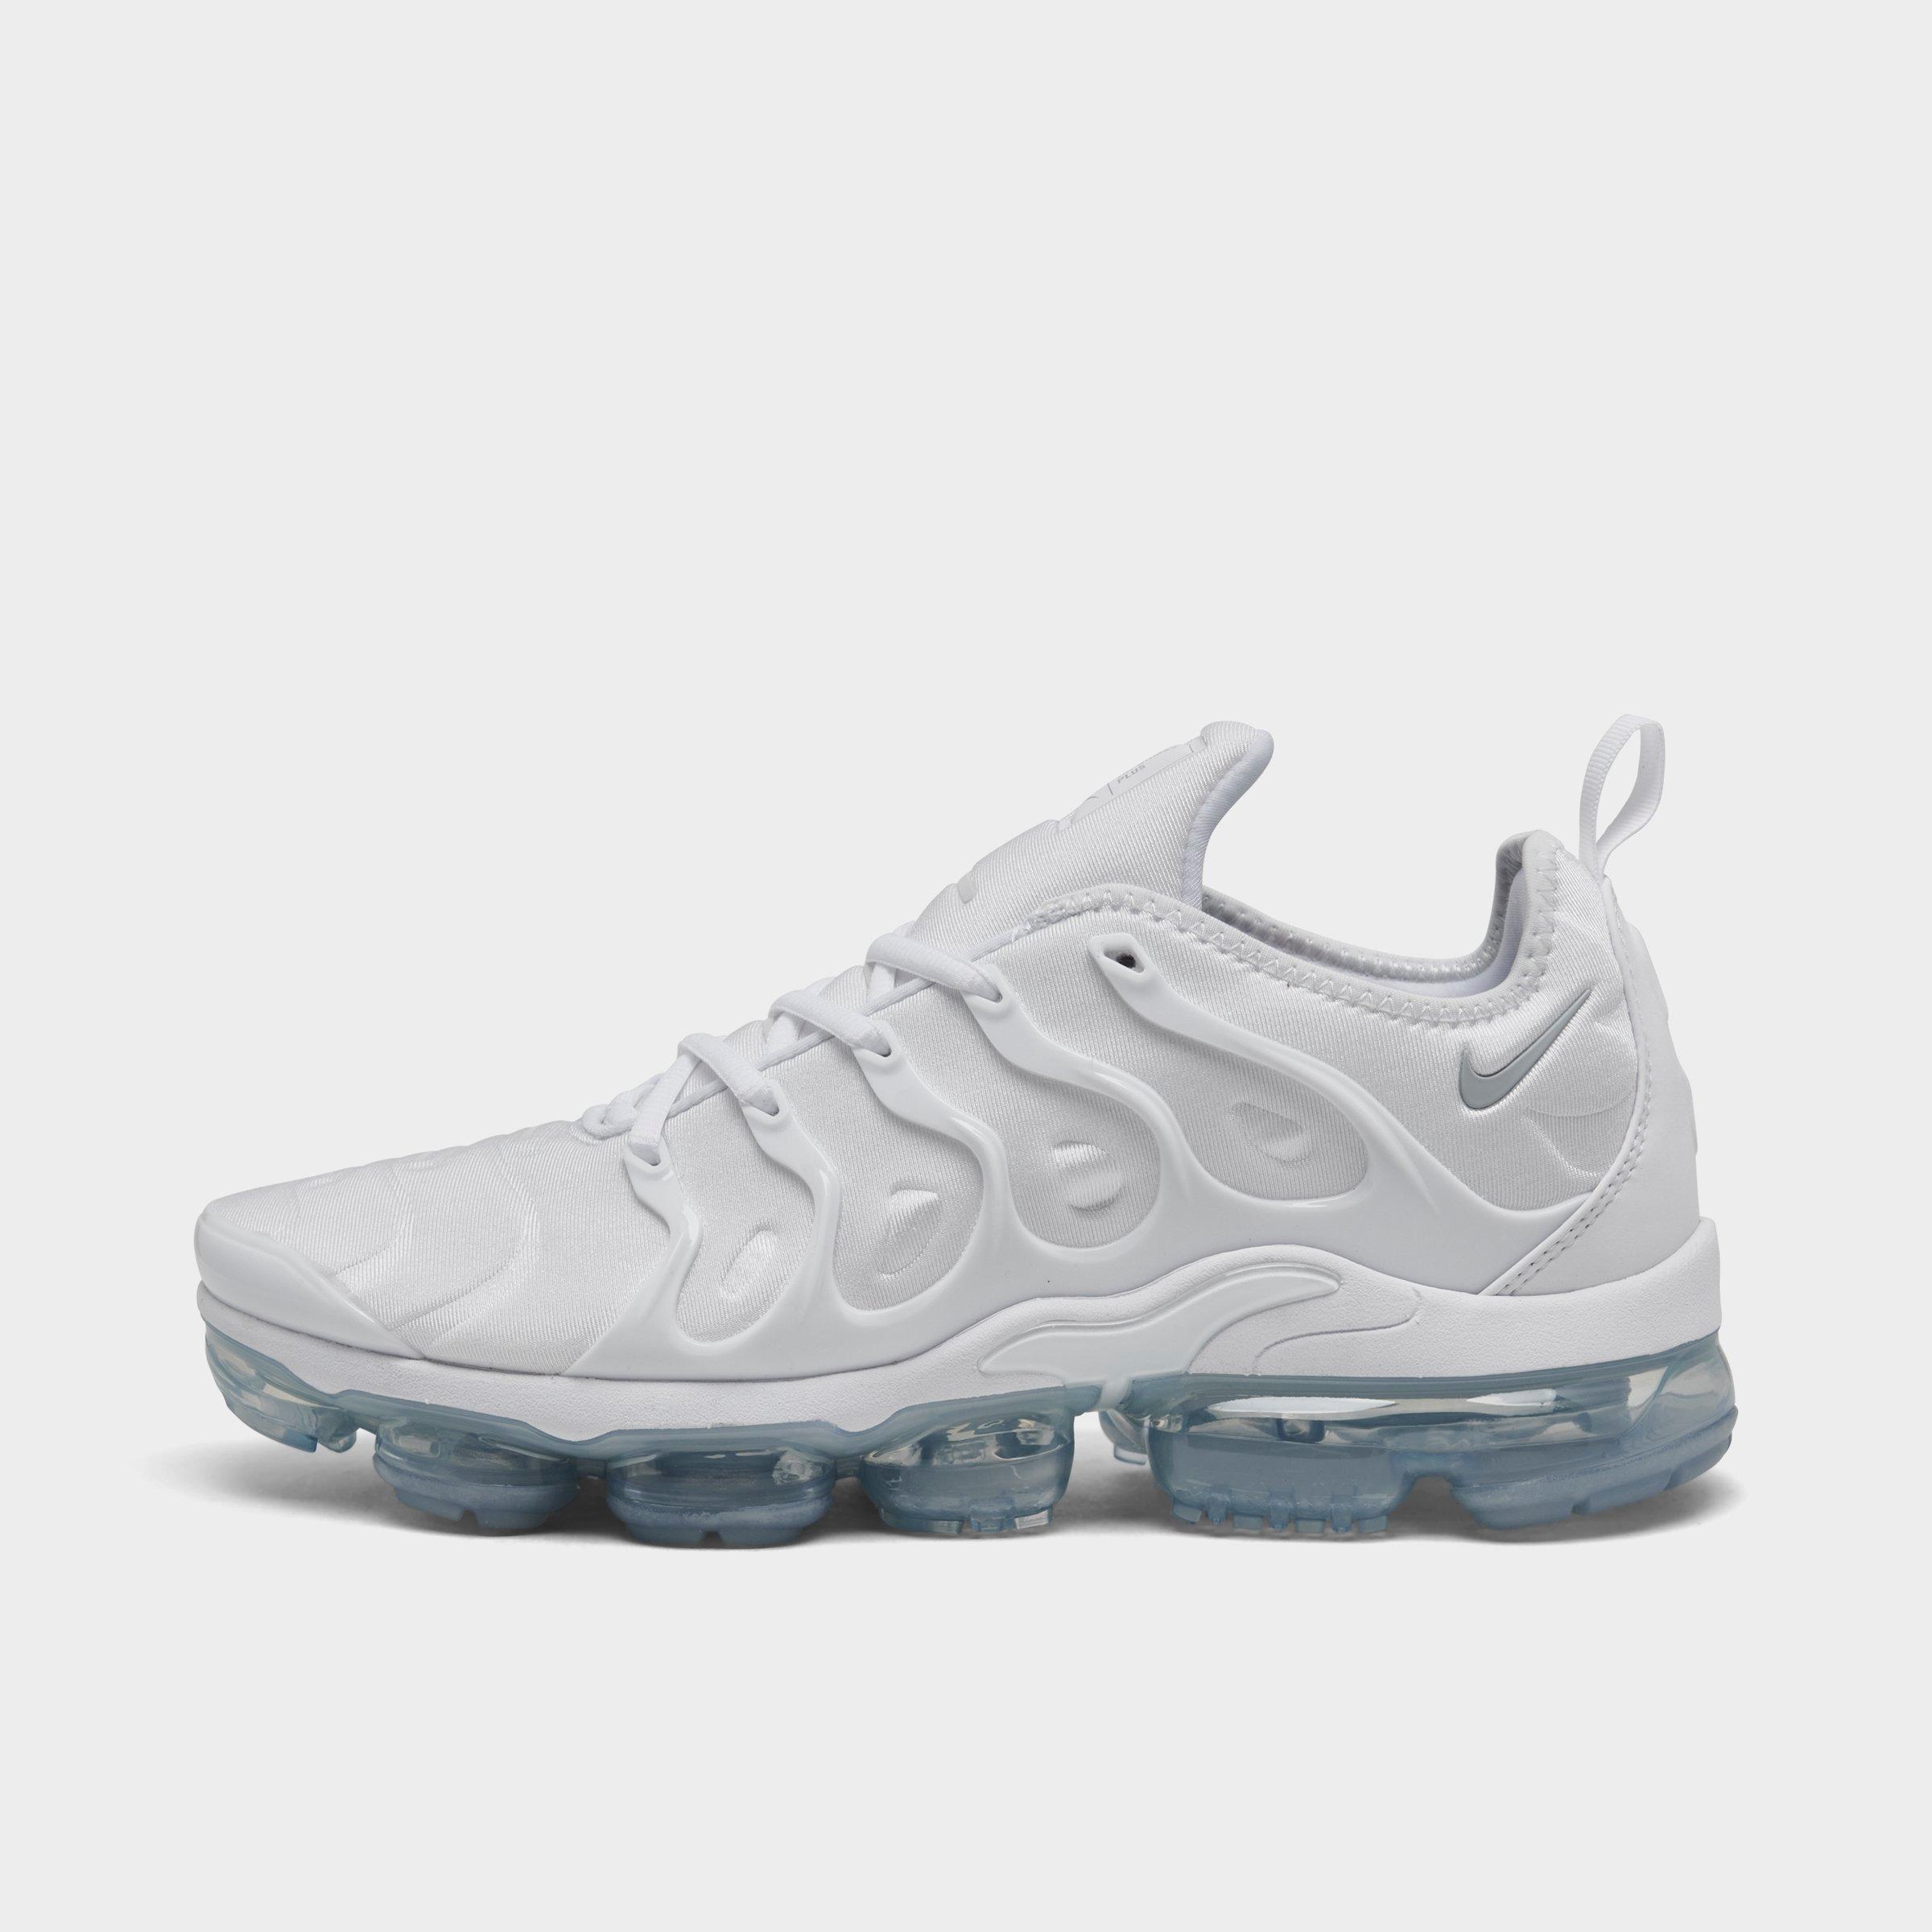 Zig Zags Land On This Nike Air VaporMax Plus HL Shoes